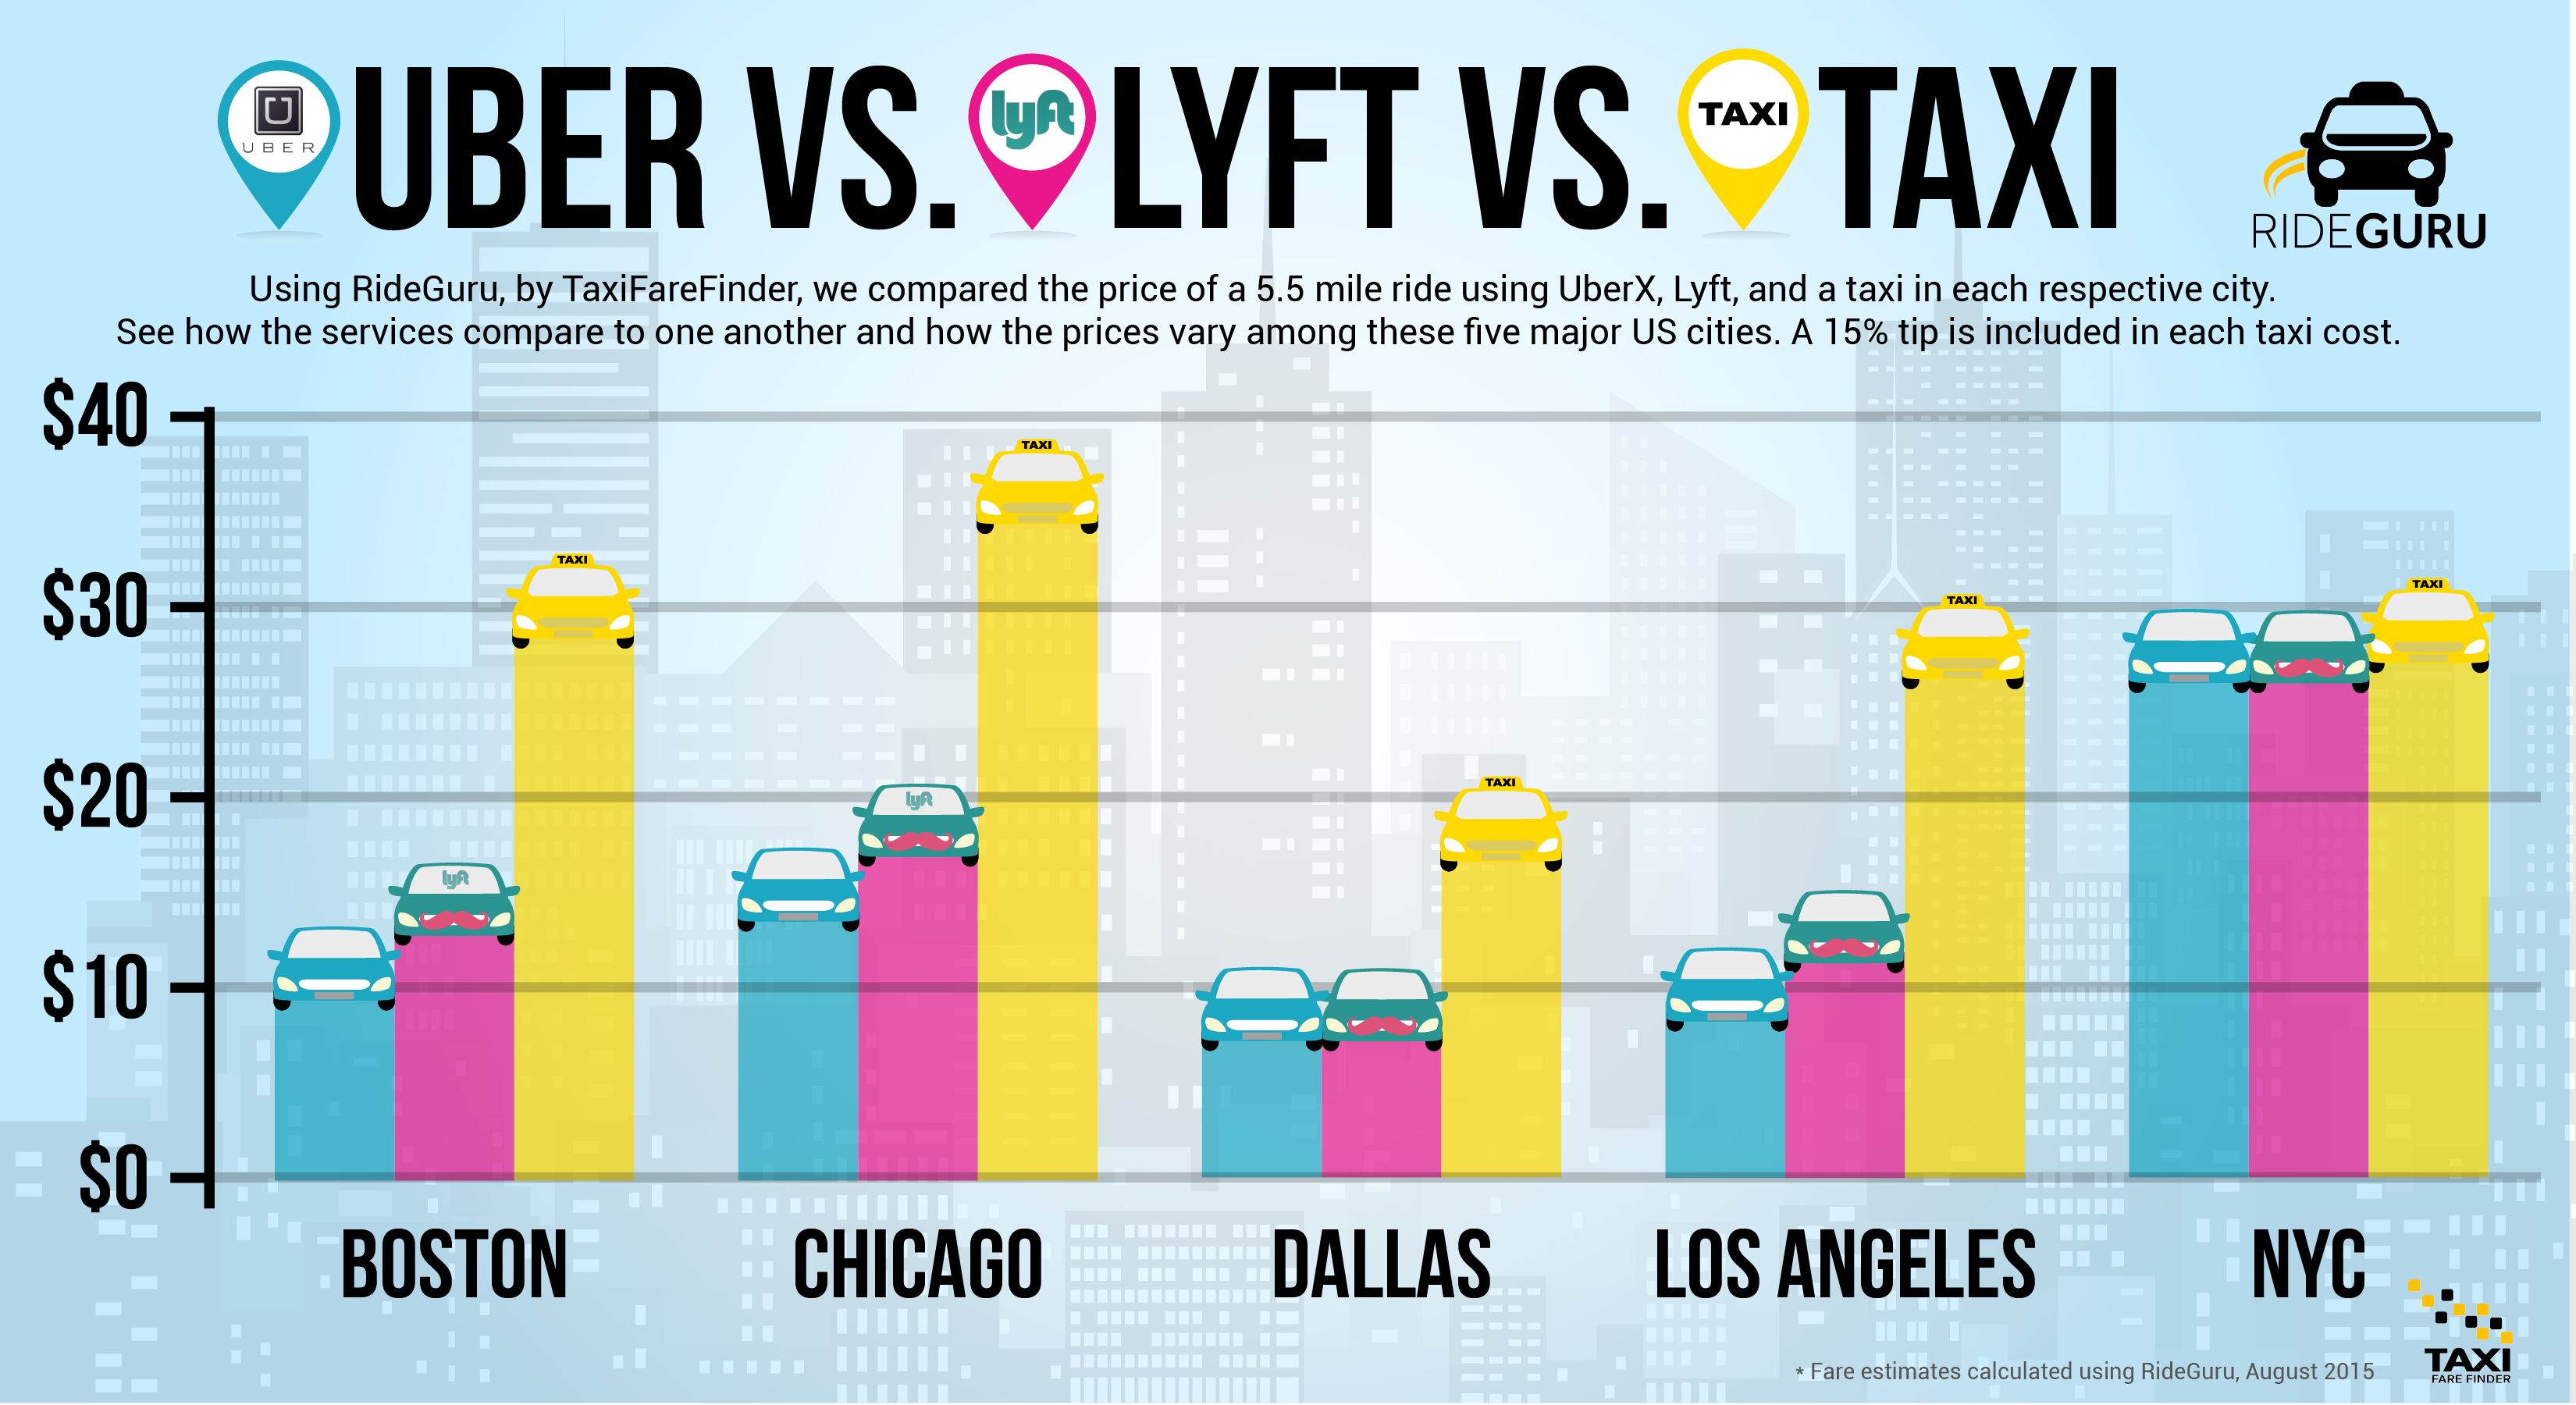 TFF News: Taxis Vs Rideshares: An Industry Depicted Through Graphics